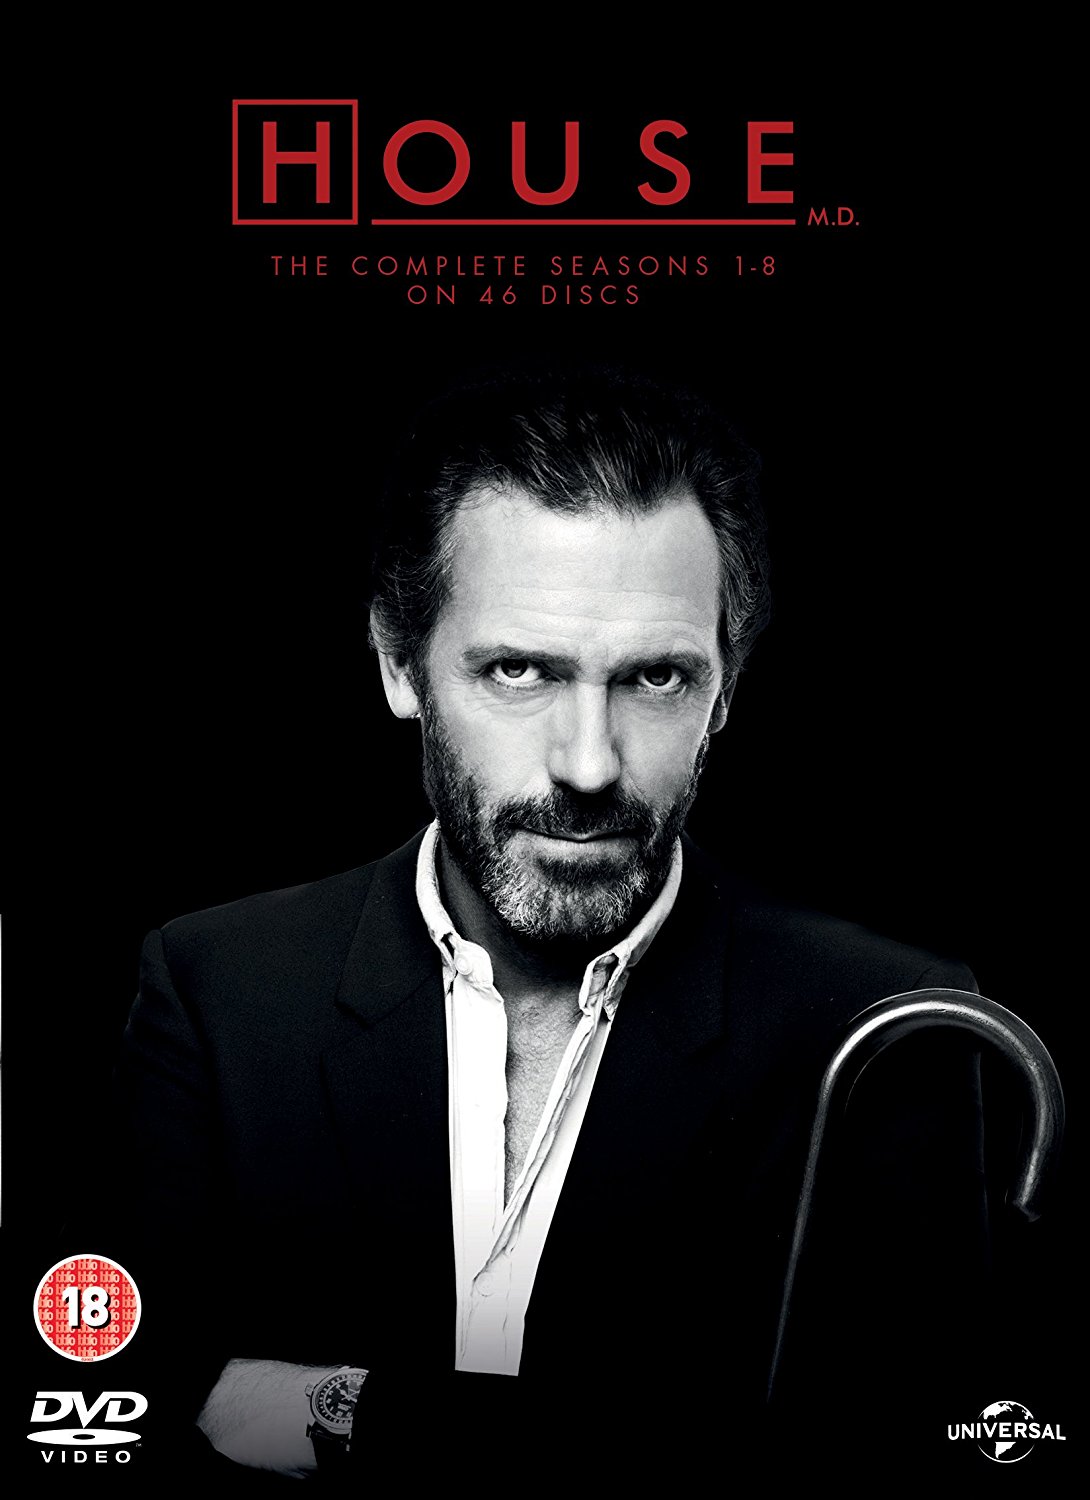 House - The Complete Seasons 1-8